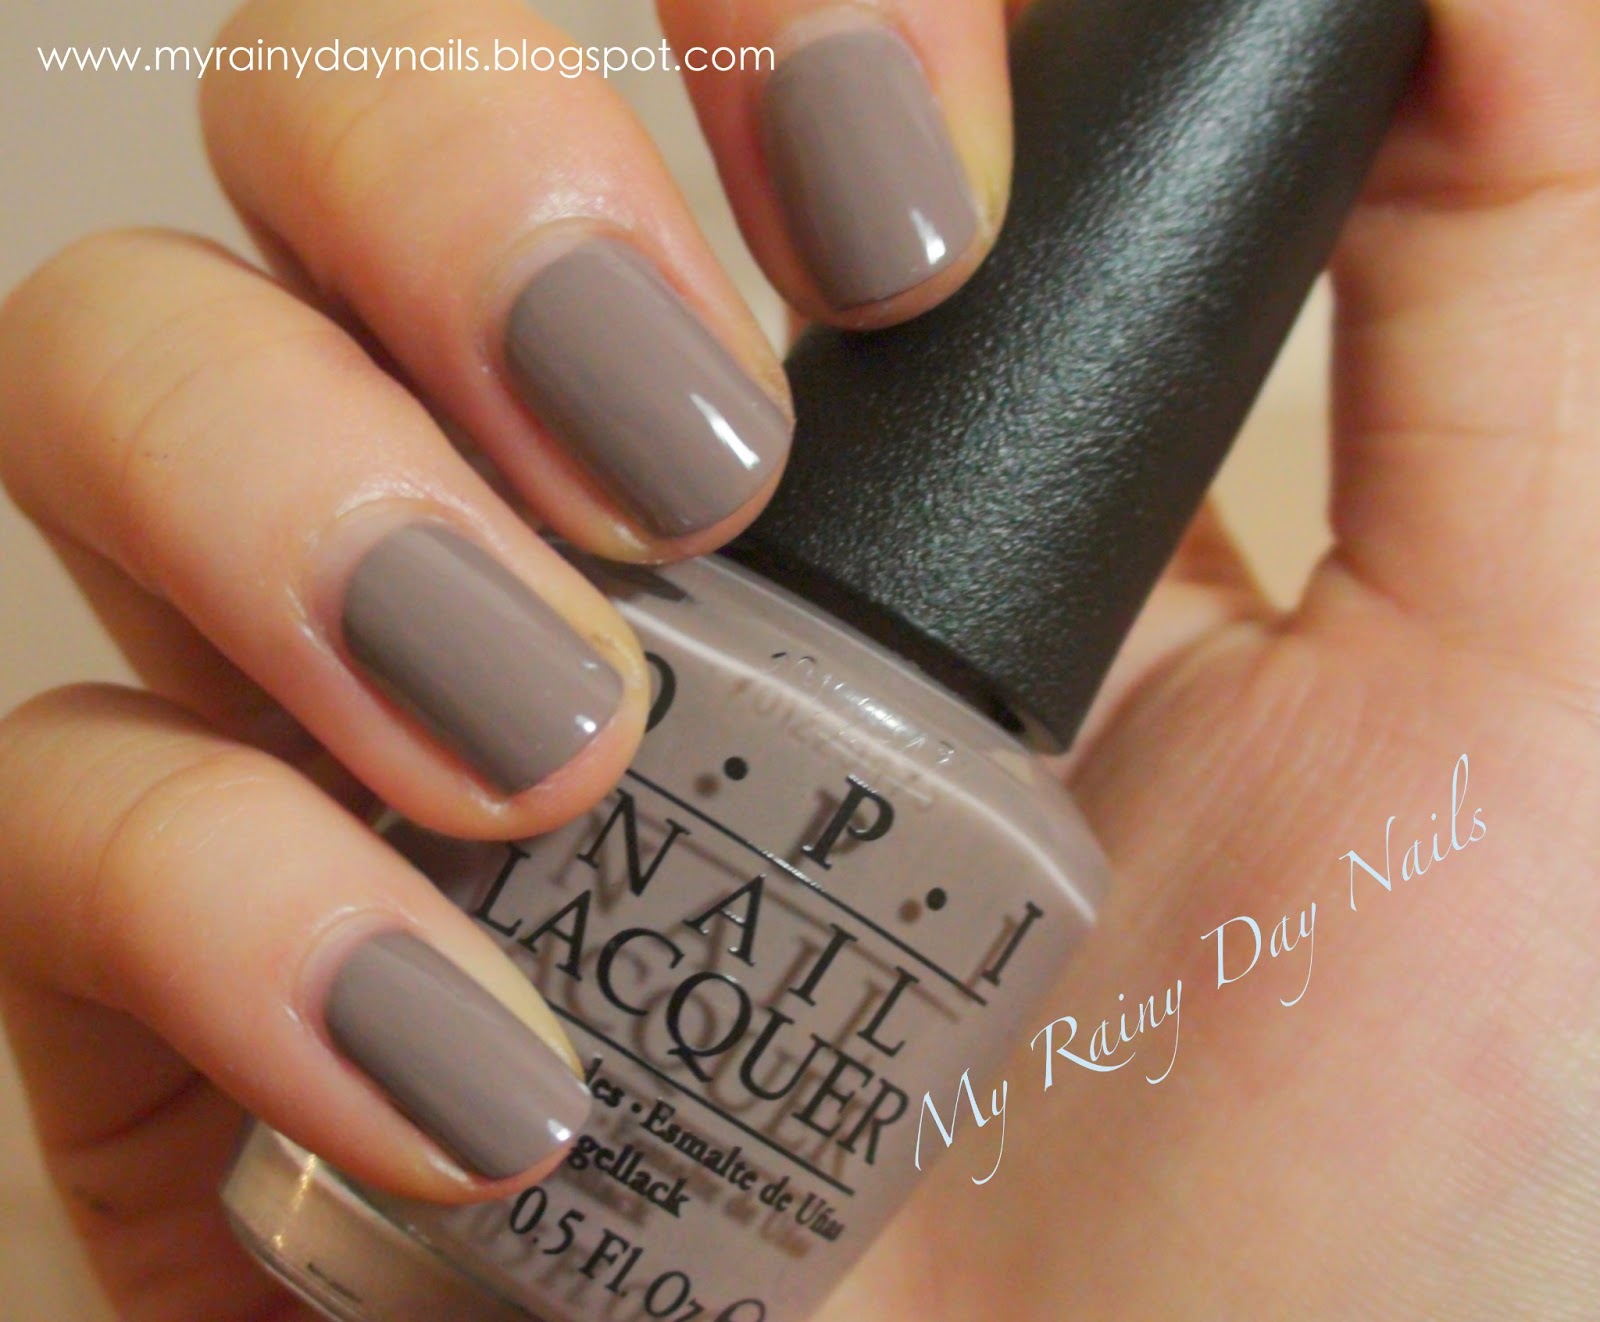 6. OPI GelColor in "Berlin There Done That" - wide 7